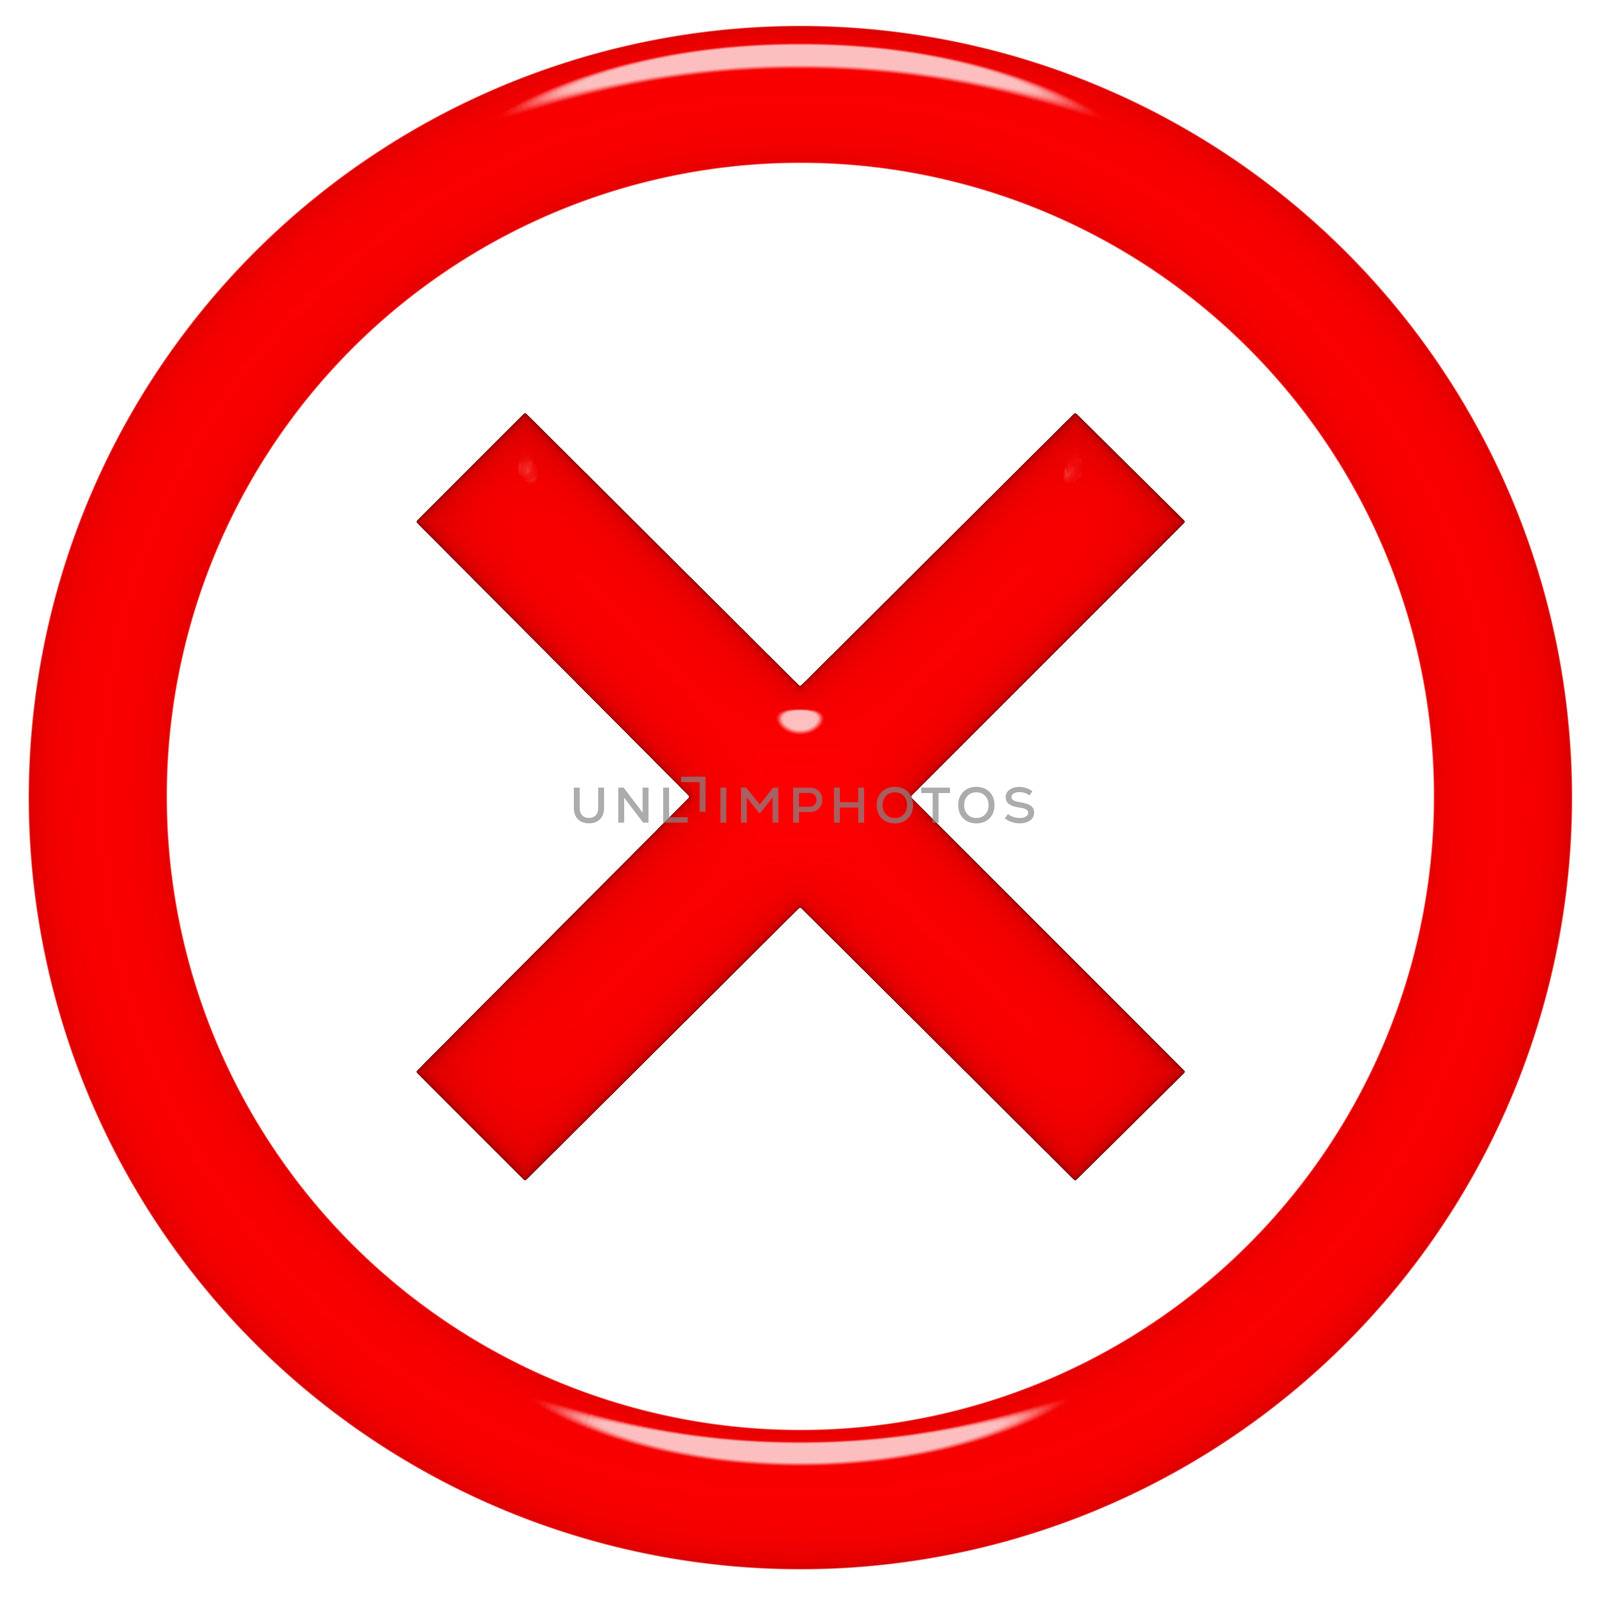 3d rejected or rated X sign isolated in white